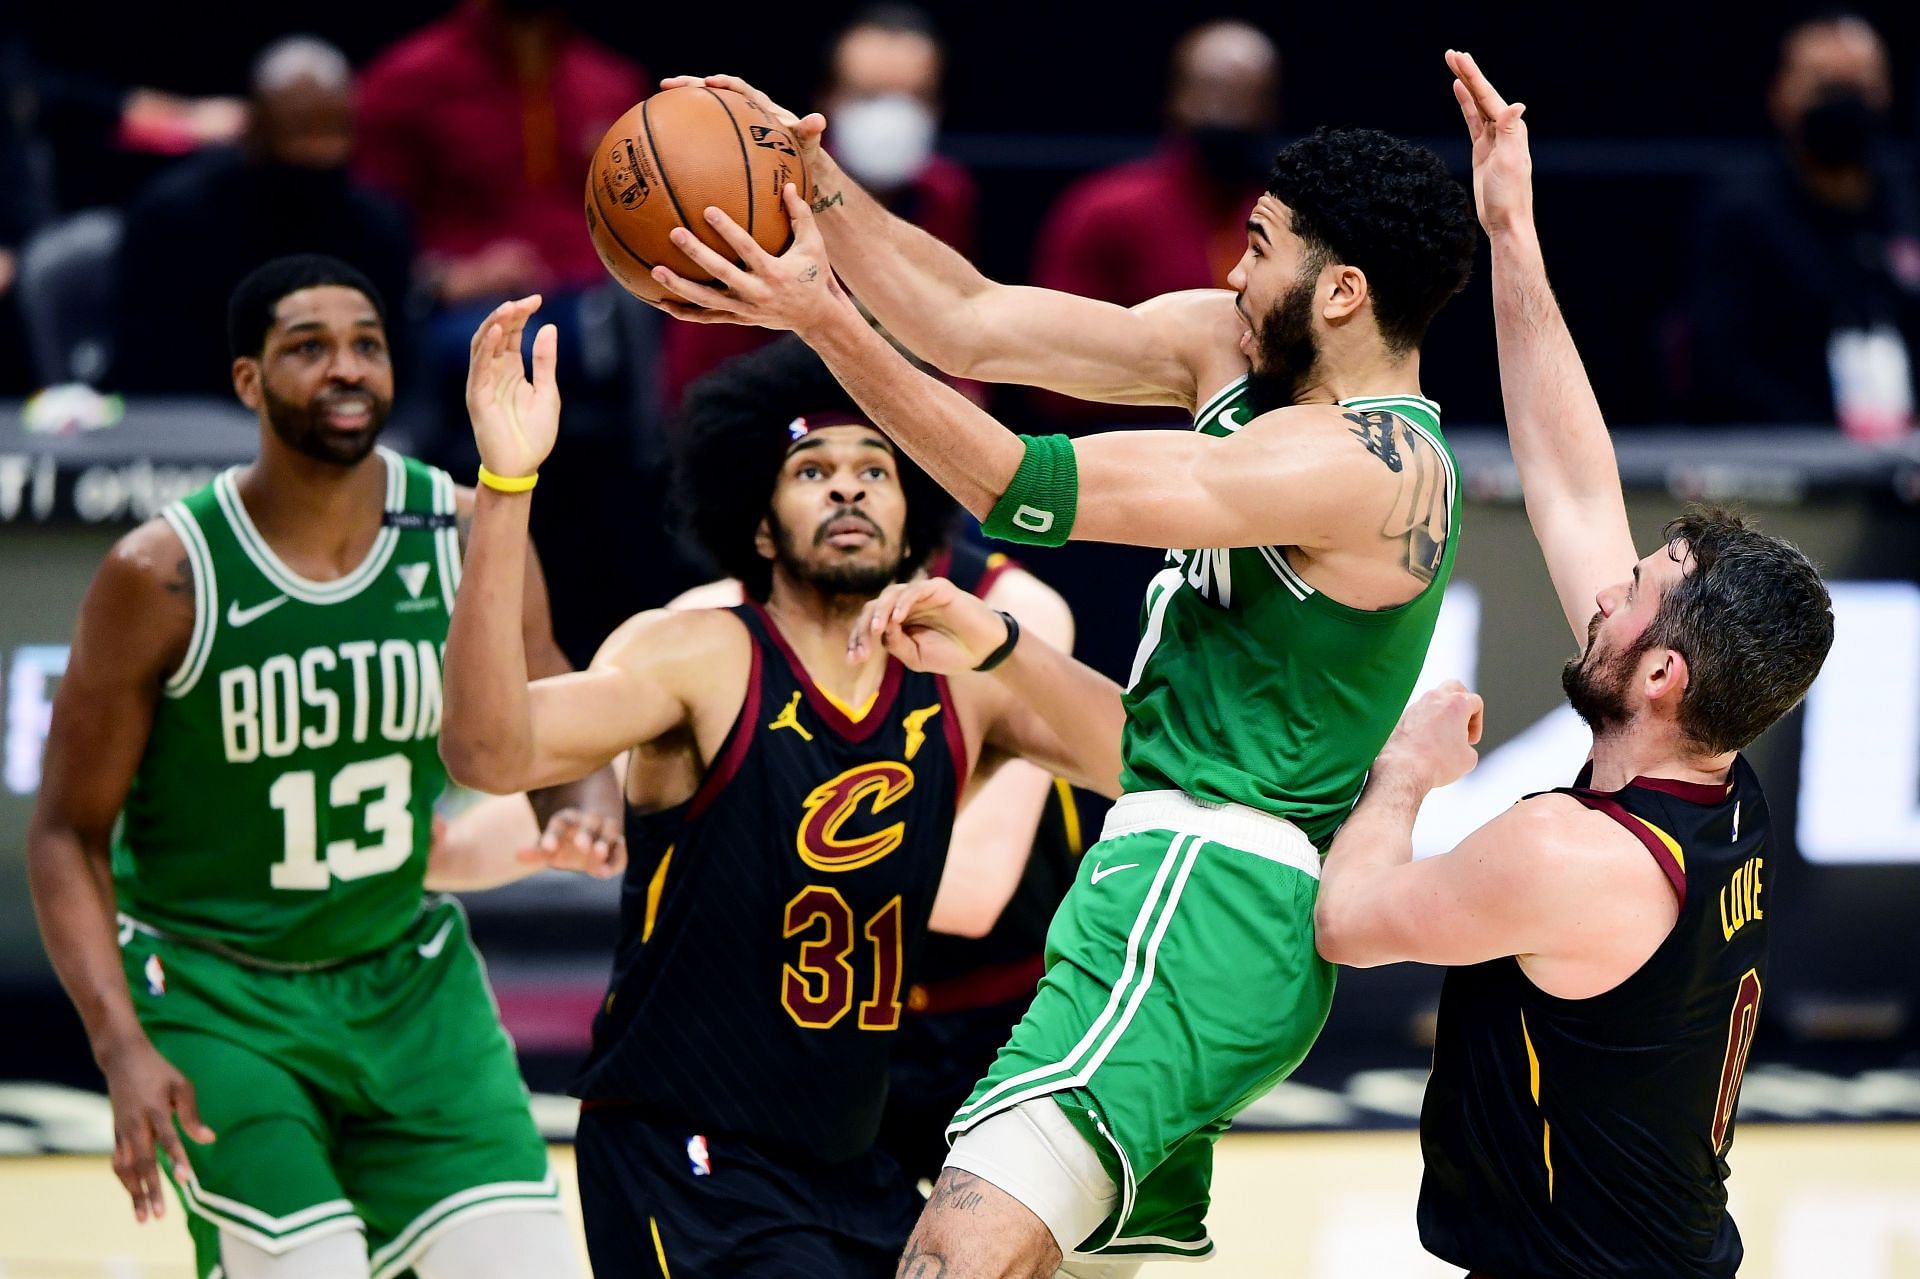 The Cleveland Cavaliers will host the Boston Celtics on November 15th.